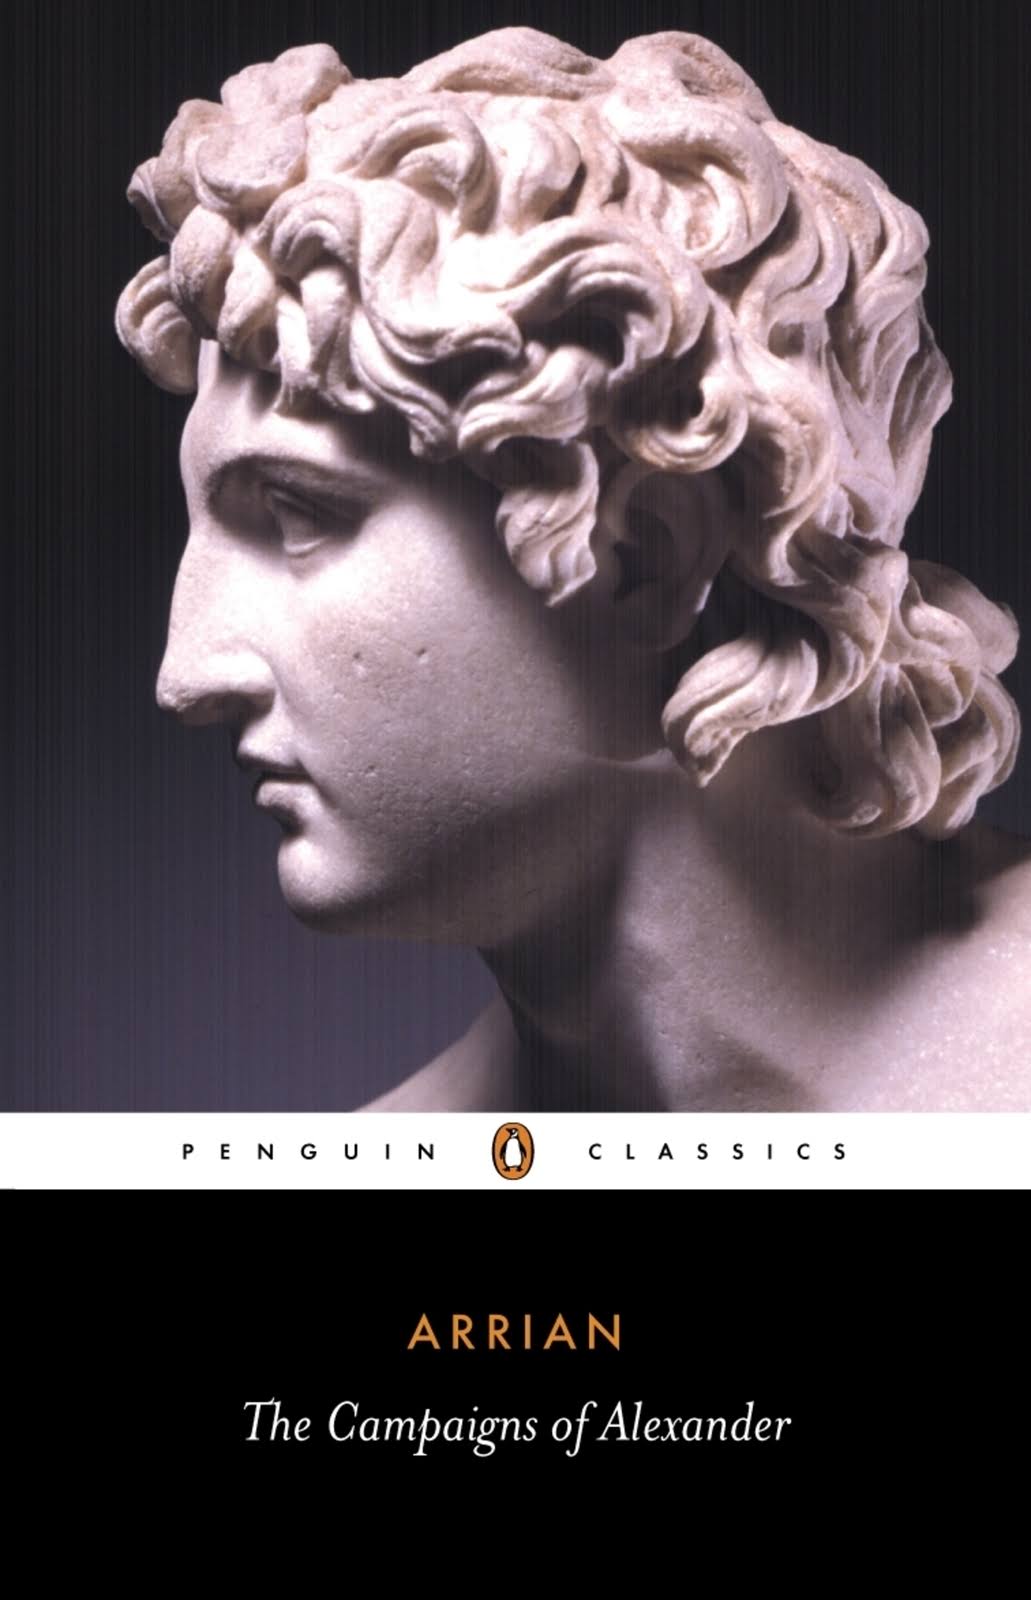 Penguin Classics: Arrian - The Campaigns of Alexander